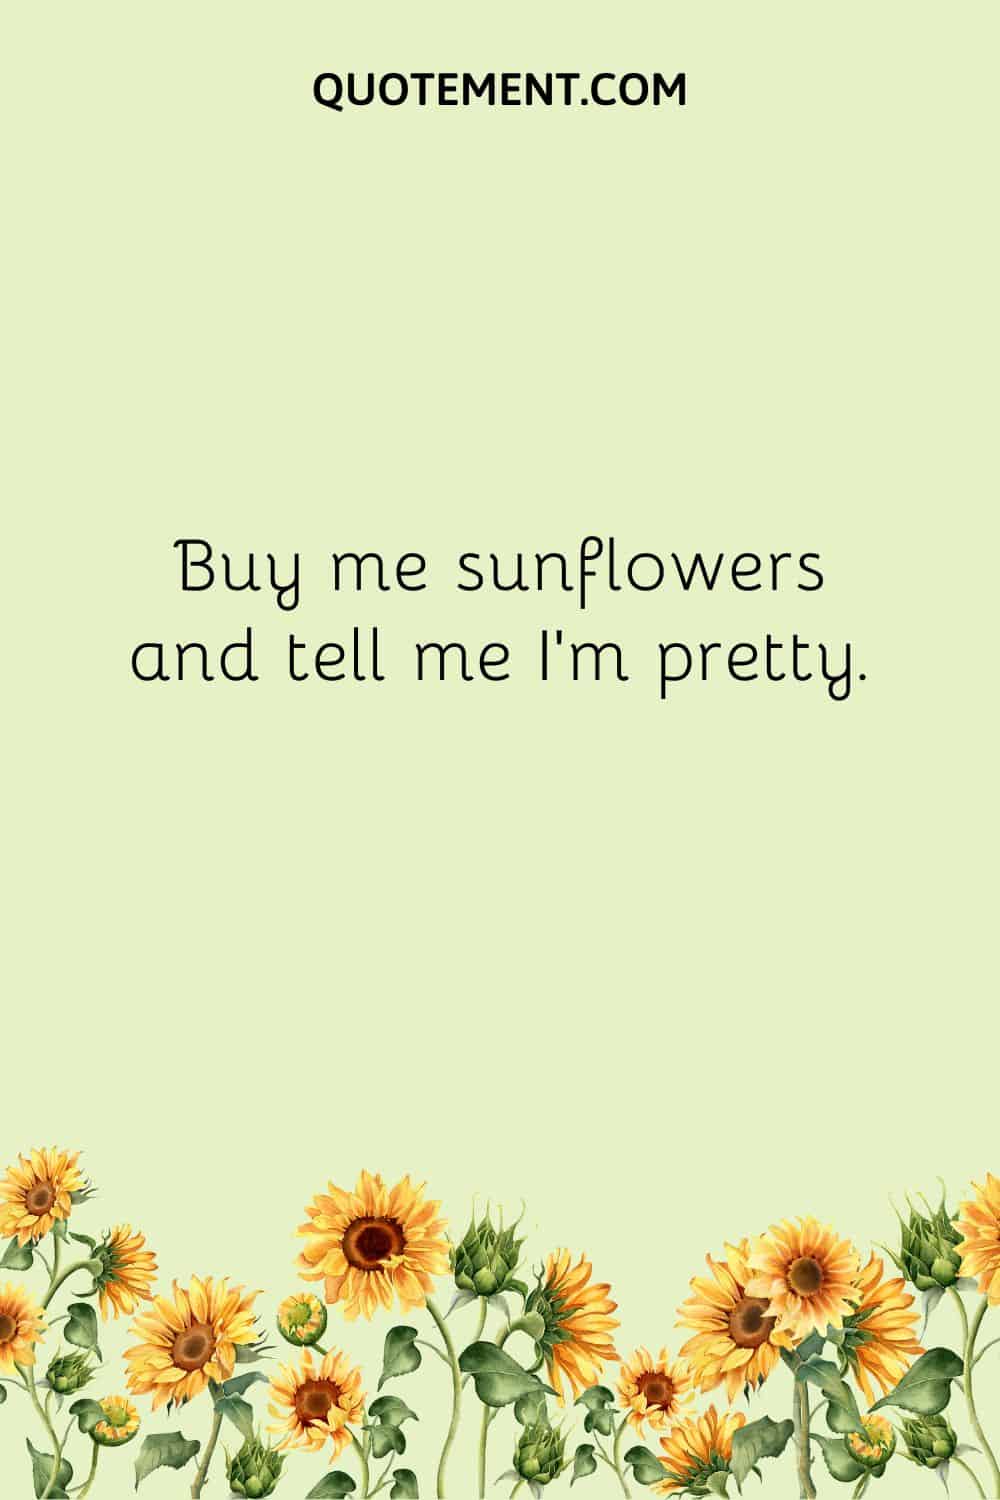 Buy me sunflowers and tell me I’m pretty.